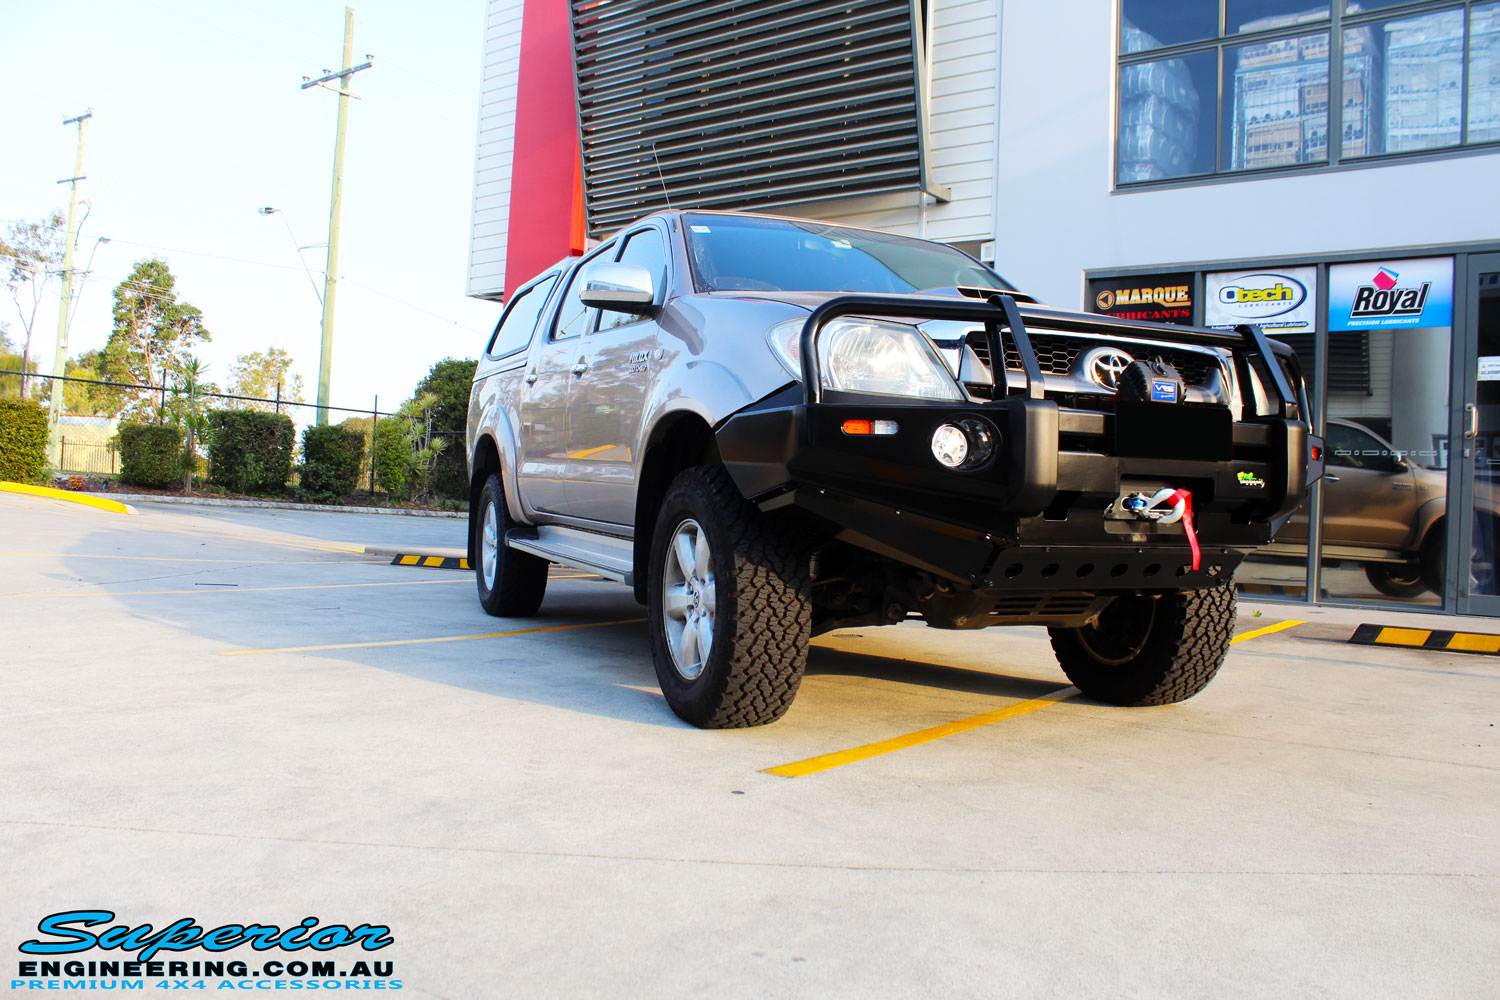 Right front side view of a Gold Toyota Vigo Hilux Dual Cab after fitment of EFS Coil Springs, Ironman 4x4 Deluxe Commercial Black Bullbar & VRS Winch